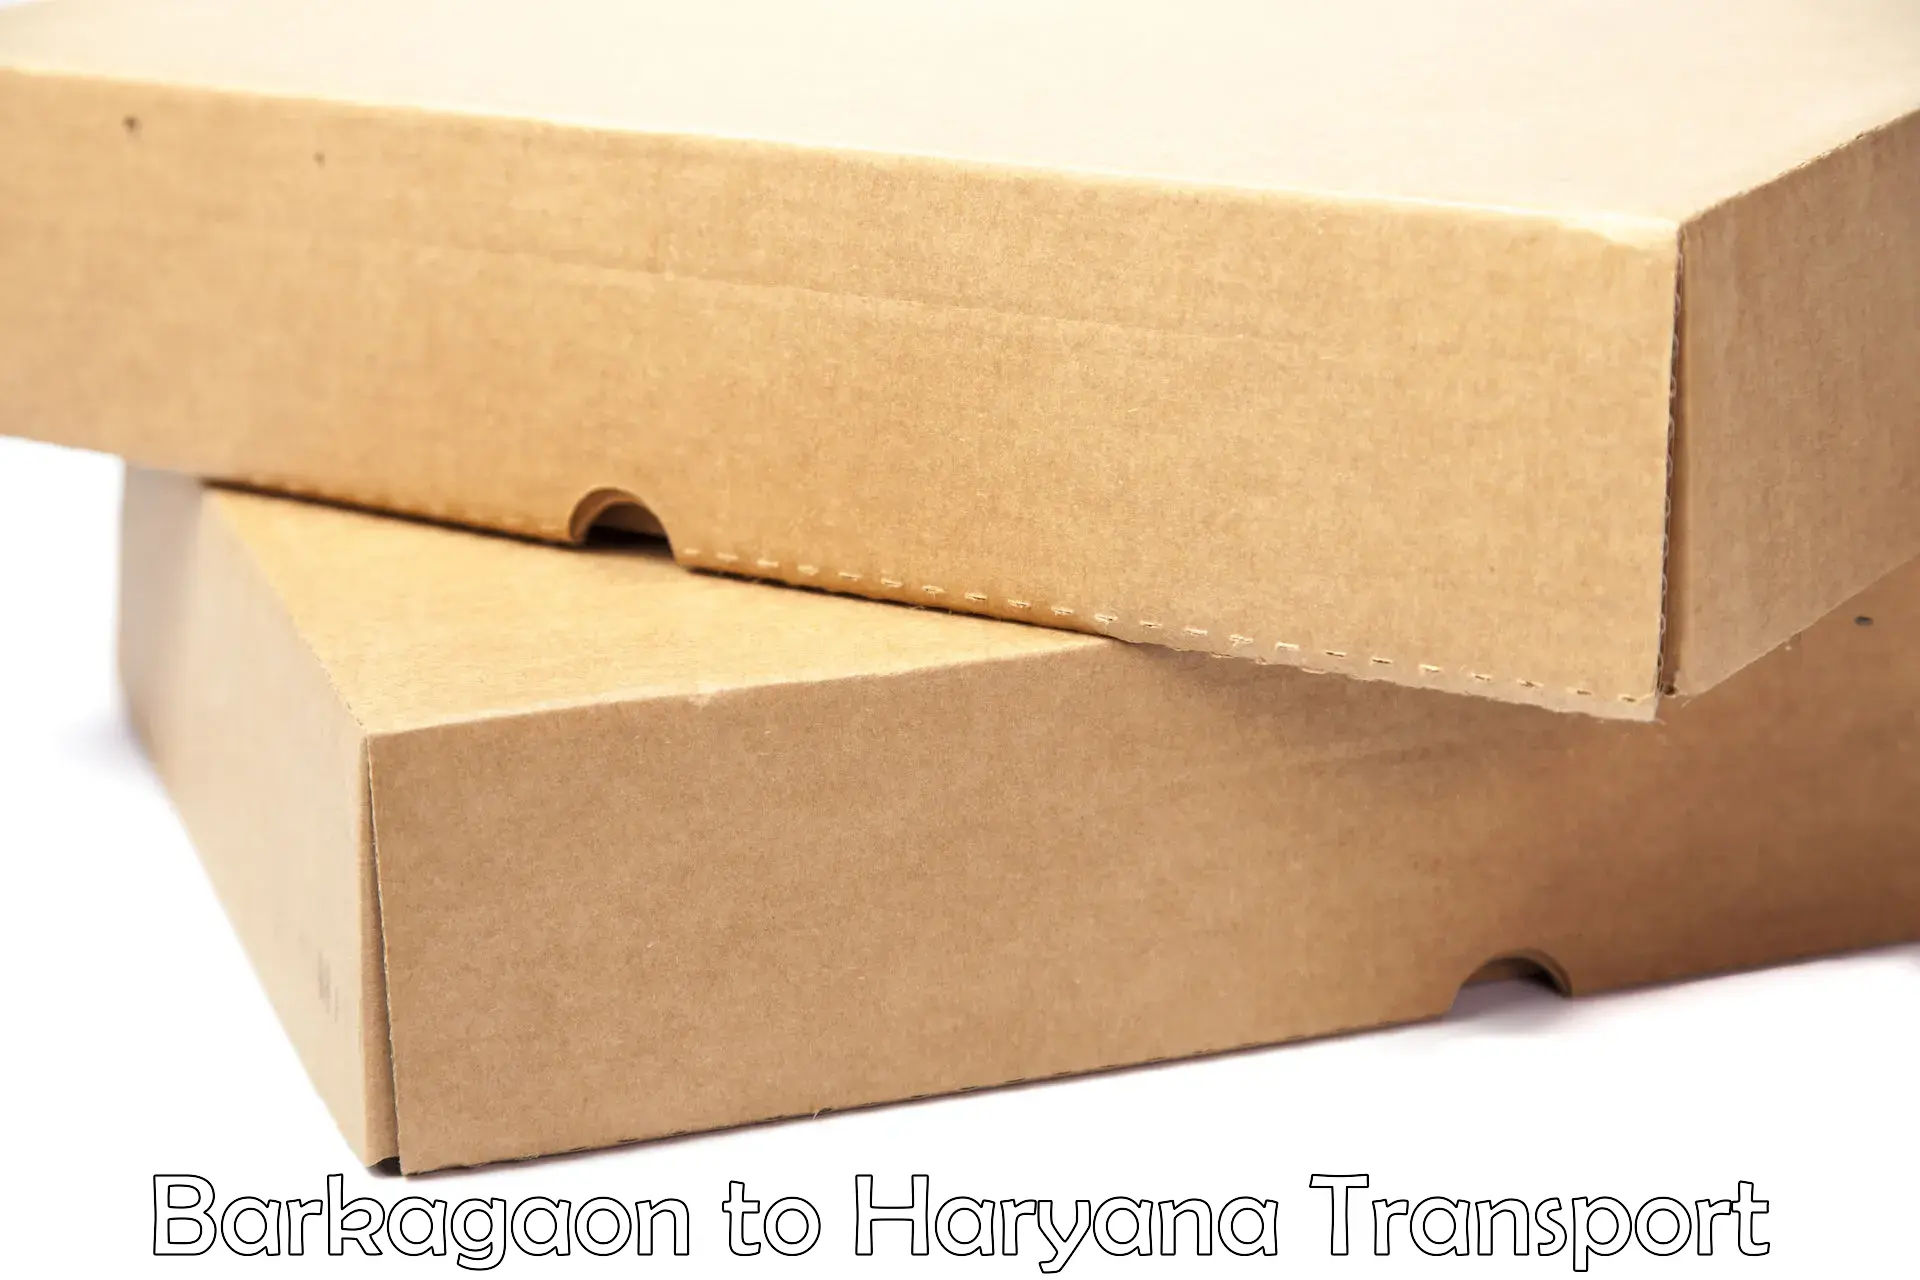 Nearby transport service in Barkagaon to Haryana